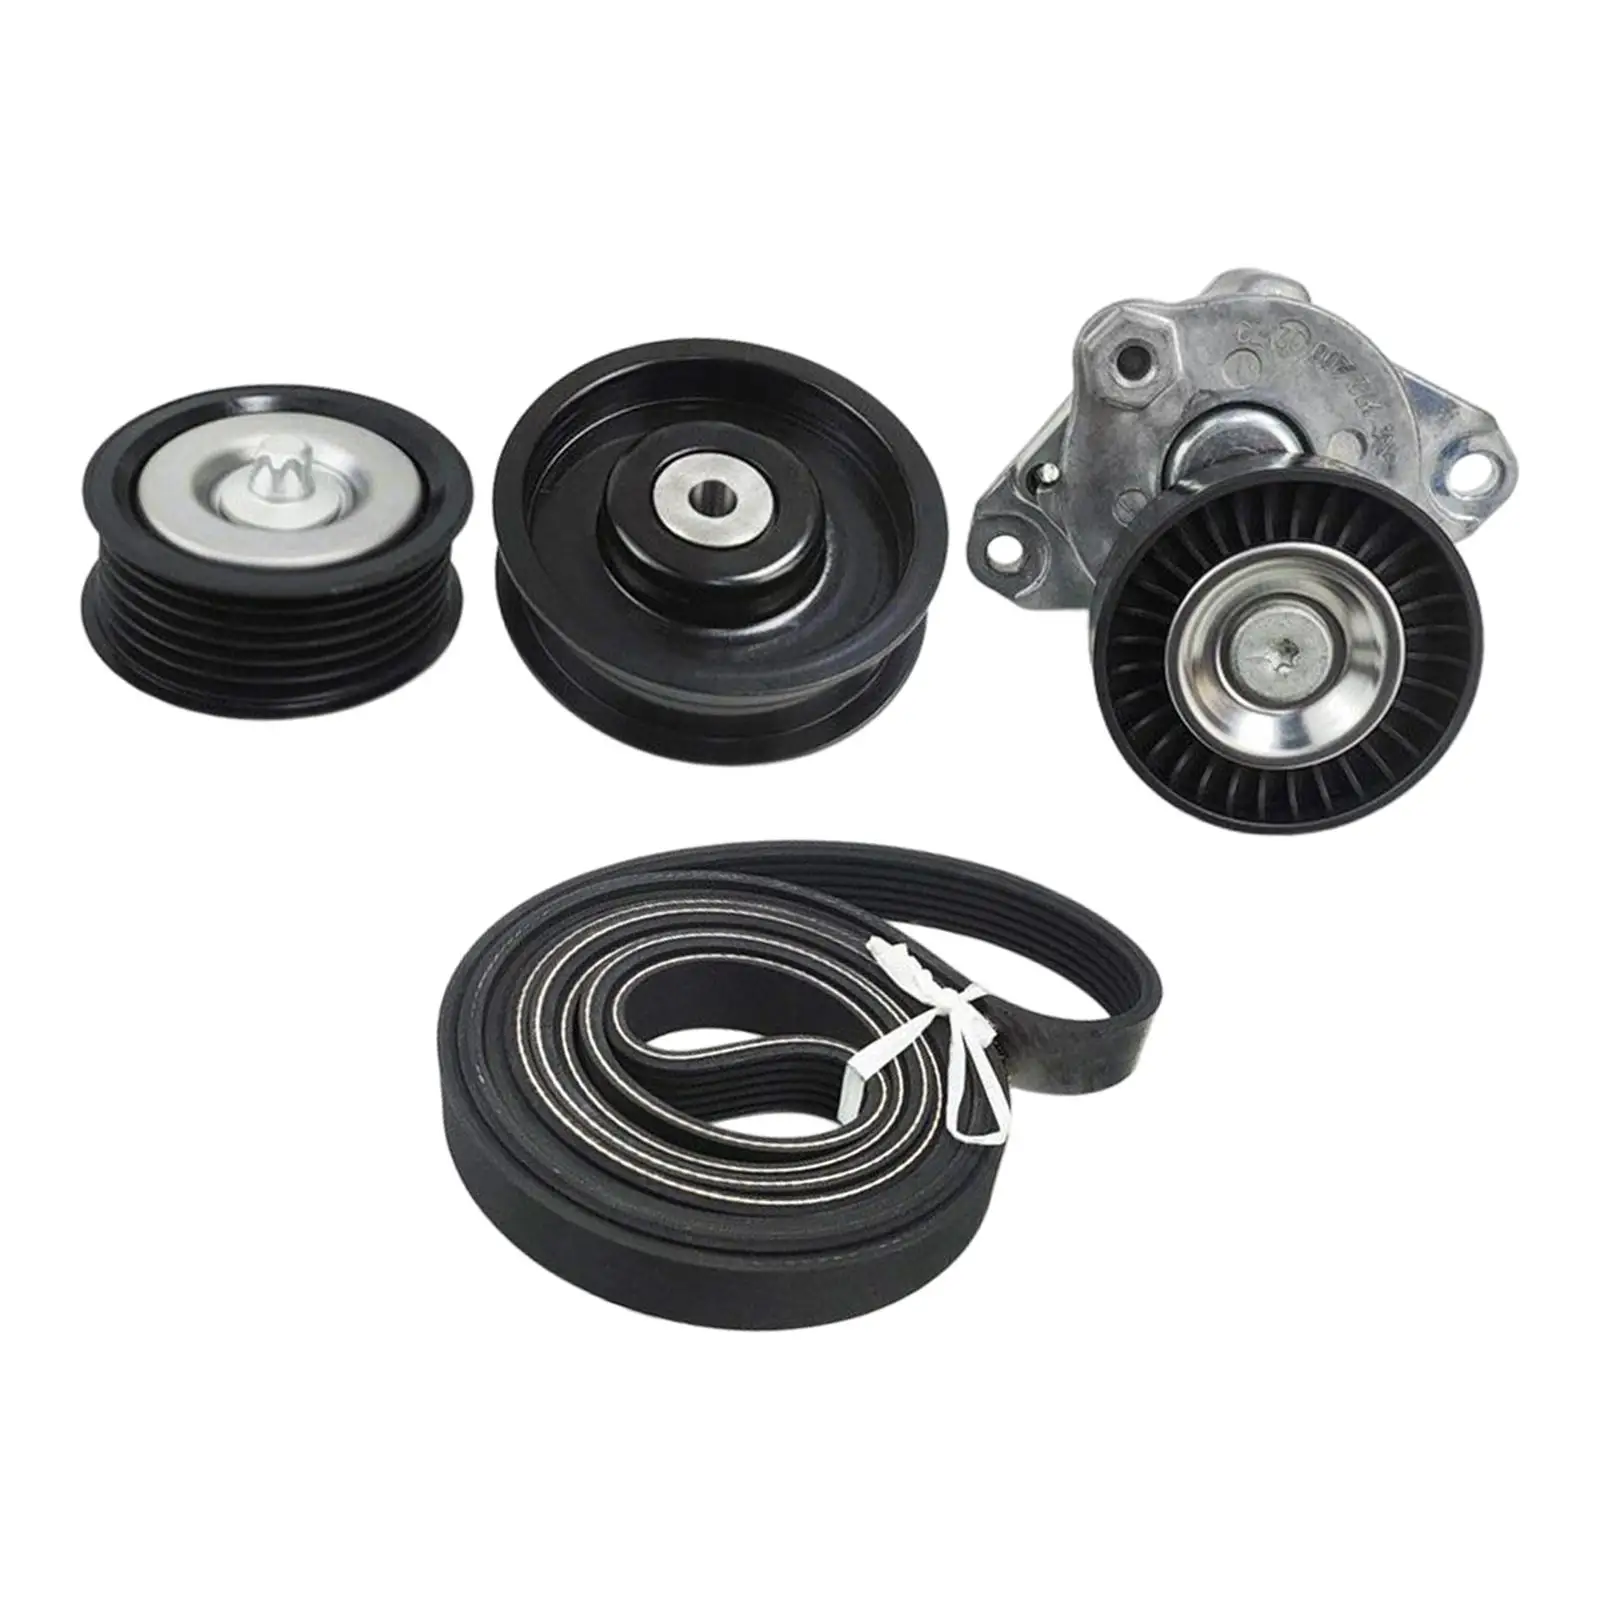 Drive Belt Tensioner and Idler Pulley Serpentine Belt Kit Repair Parts for Mercedes-benz C230 C280 CL550 E550 ml550 GLK350